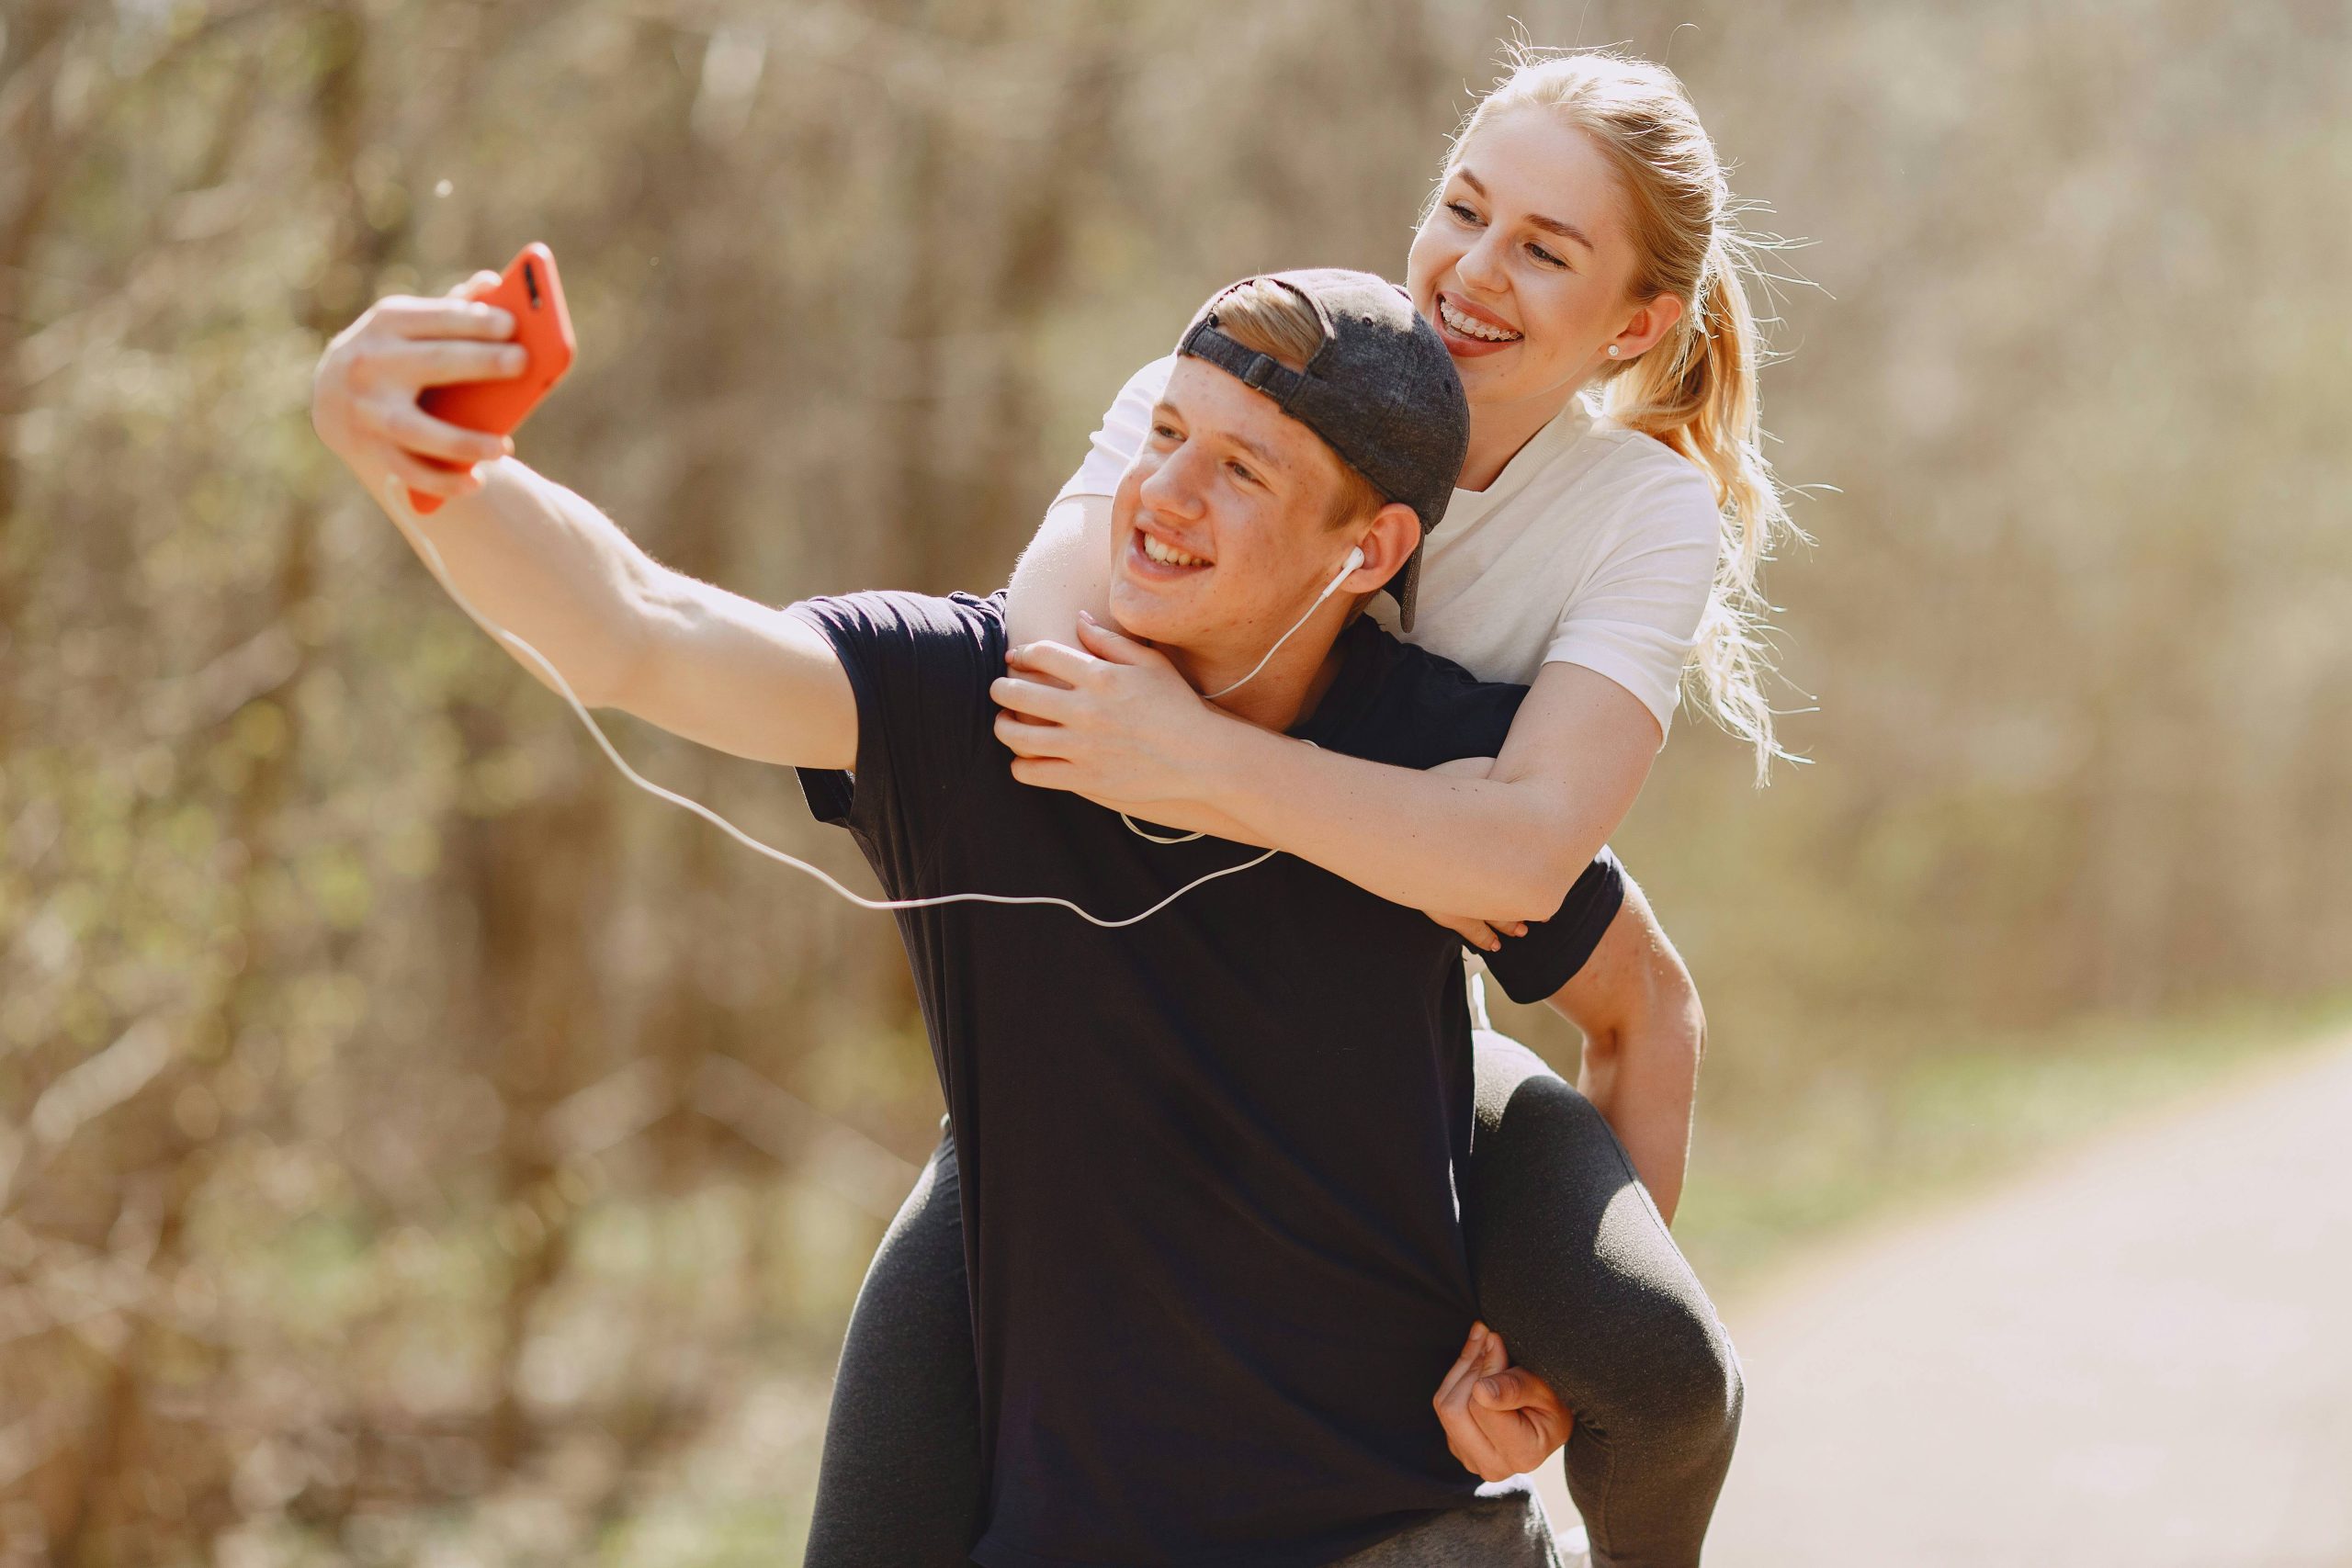 A young man gives a piggyback ride to a young woman as they take a selfie together outdoors, both wearing earphones and casual clothing, capturing one of their playful couple photos.